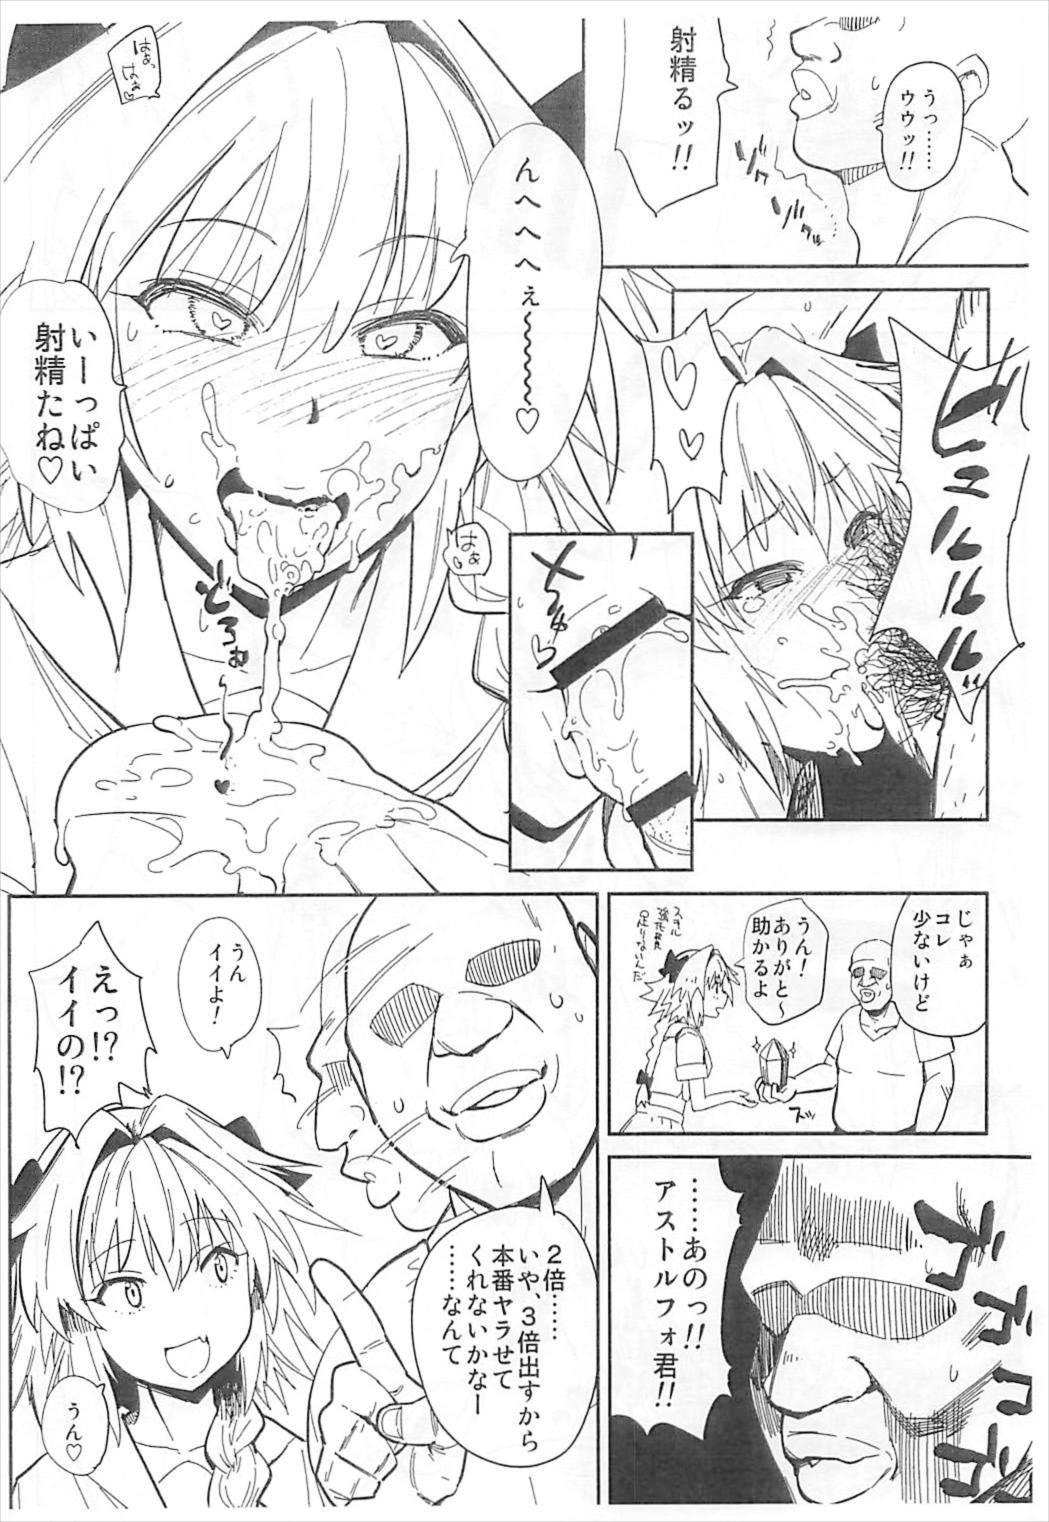 Transsexual 5000 Chou QP Hoshii - Fate grand order Pete - Page 3